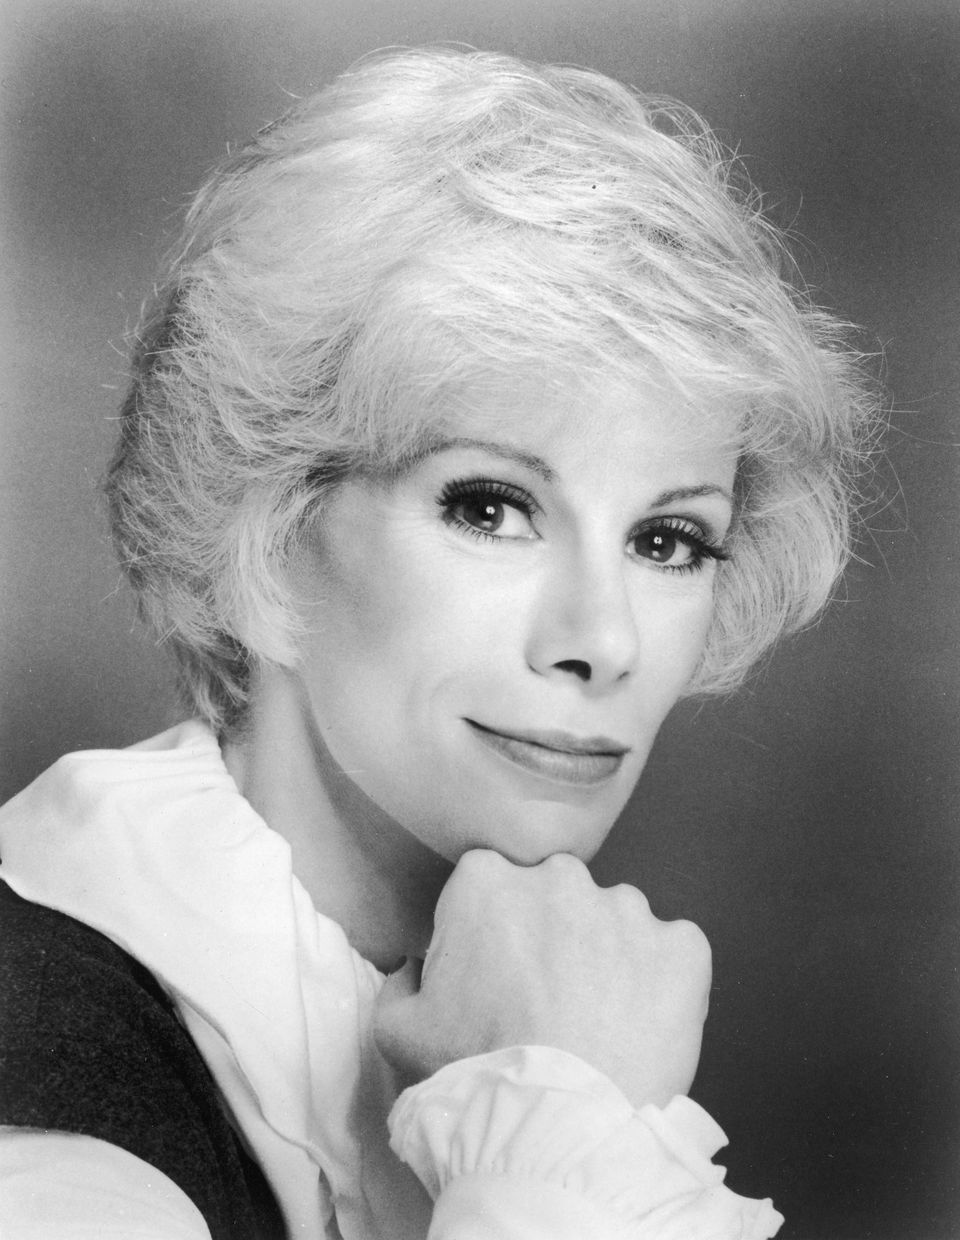 "<a href="http://www.theguardian.com/stage/2012/aug/09/comedy-gold-joan-rivers" role="link" class=" js-entry-link cet-external-link" data-vars-item-name="I hate thin people" data-vars-item-type="text" data-vars-unit-name="5bb5fca1e4b03bcd086035ac" data-vars-unit-type="buzz_body" data-vars-target-content-id="http://www.theguardian.com/stage/2012/aug/09/comedy-gold-joan-rivers" data-vars-target-content-type="url" data-vars-type="web_external_link" data-vars-subunit-name="before_you_go_slideshow" data-vars-subunit-type="component" data-vars-position-in-subunit="0">I hate thin people</a>; 'Oh, does the tampon make me look fat?'"